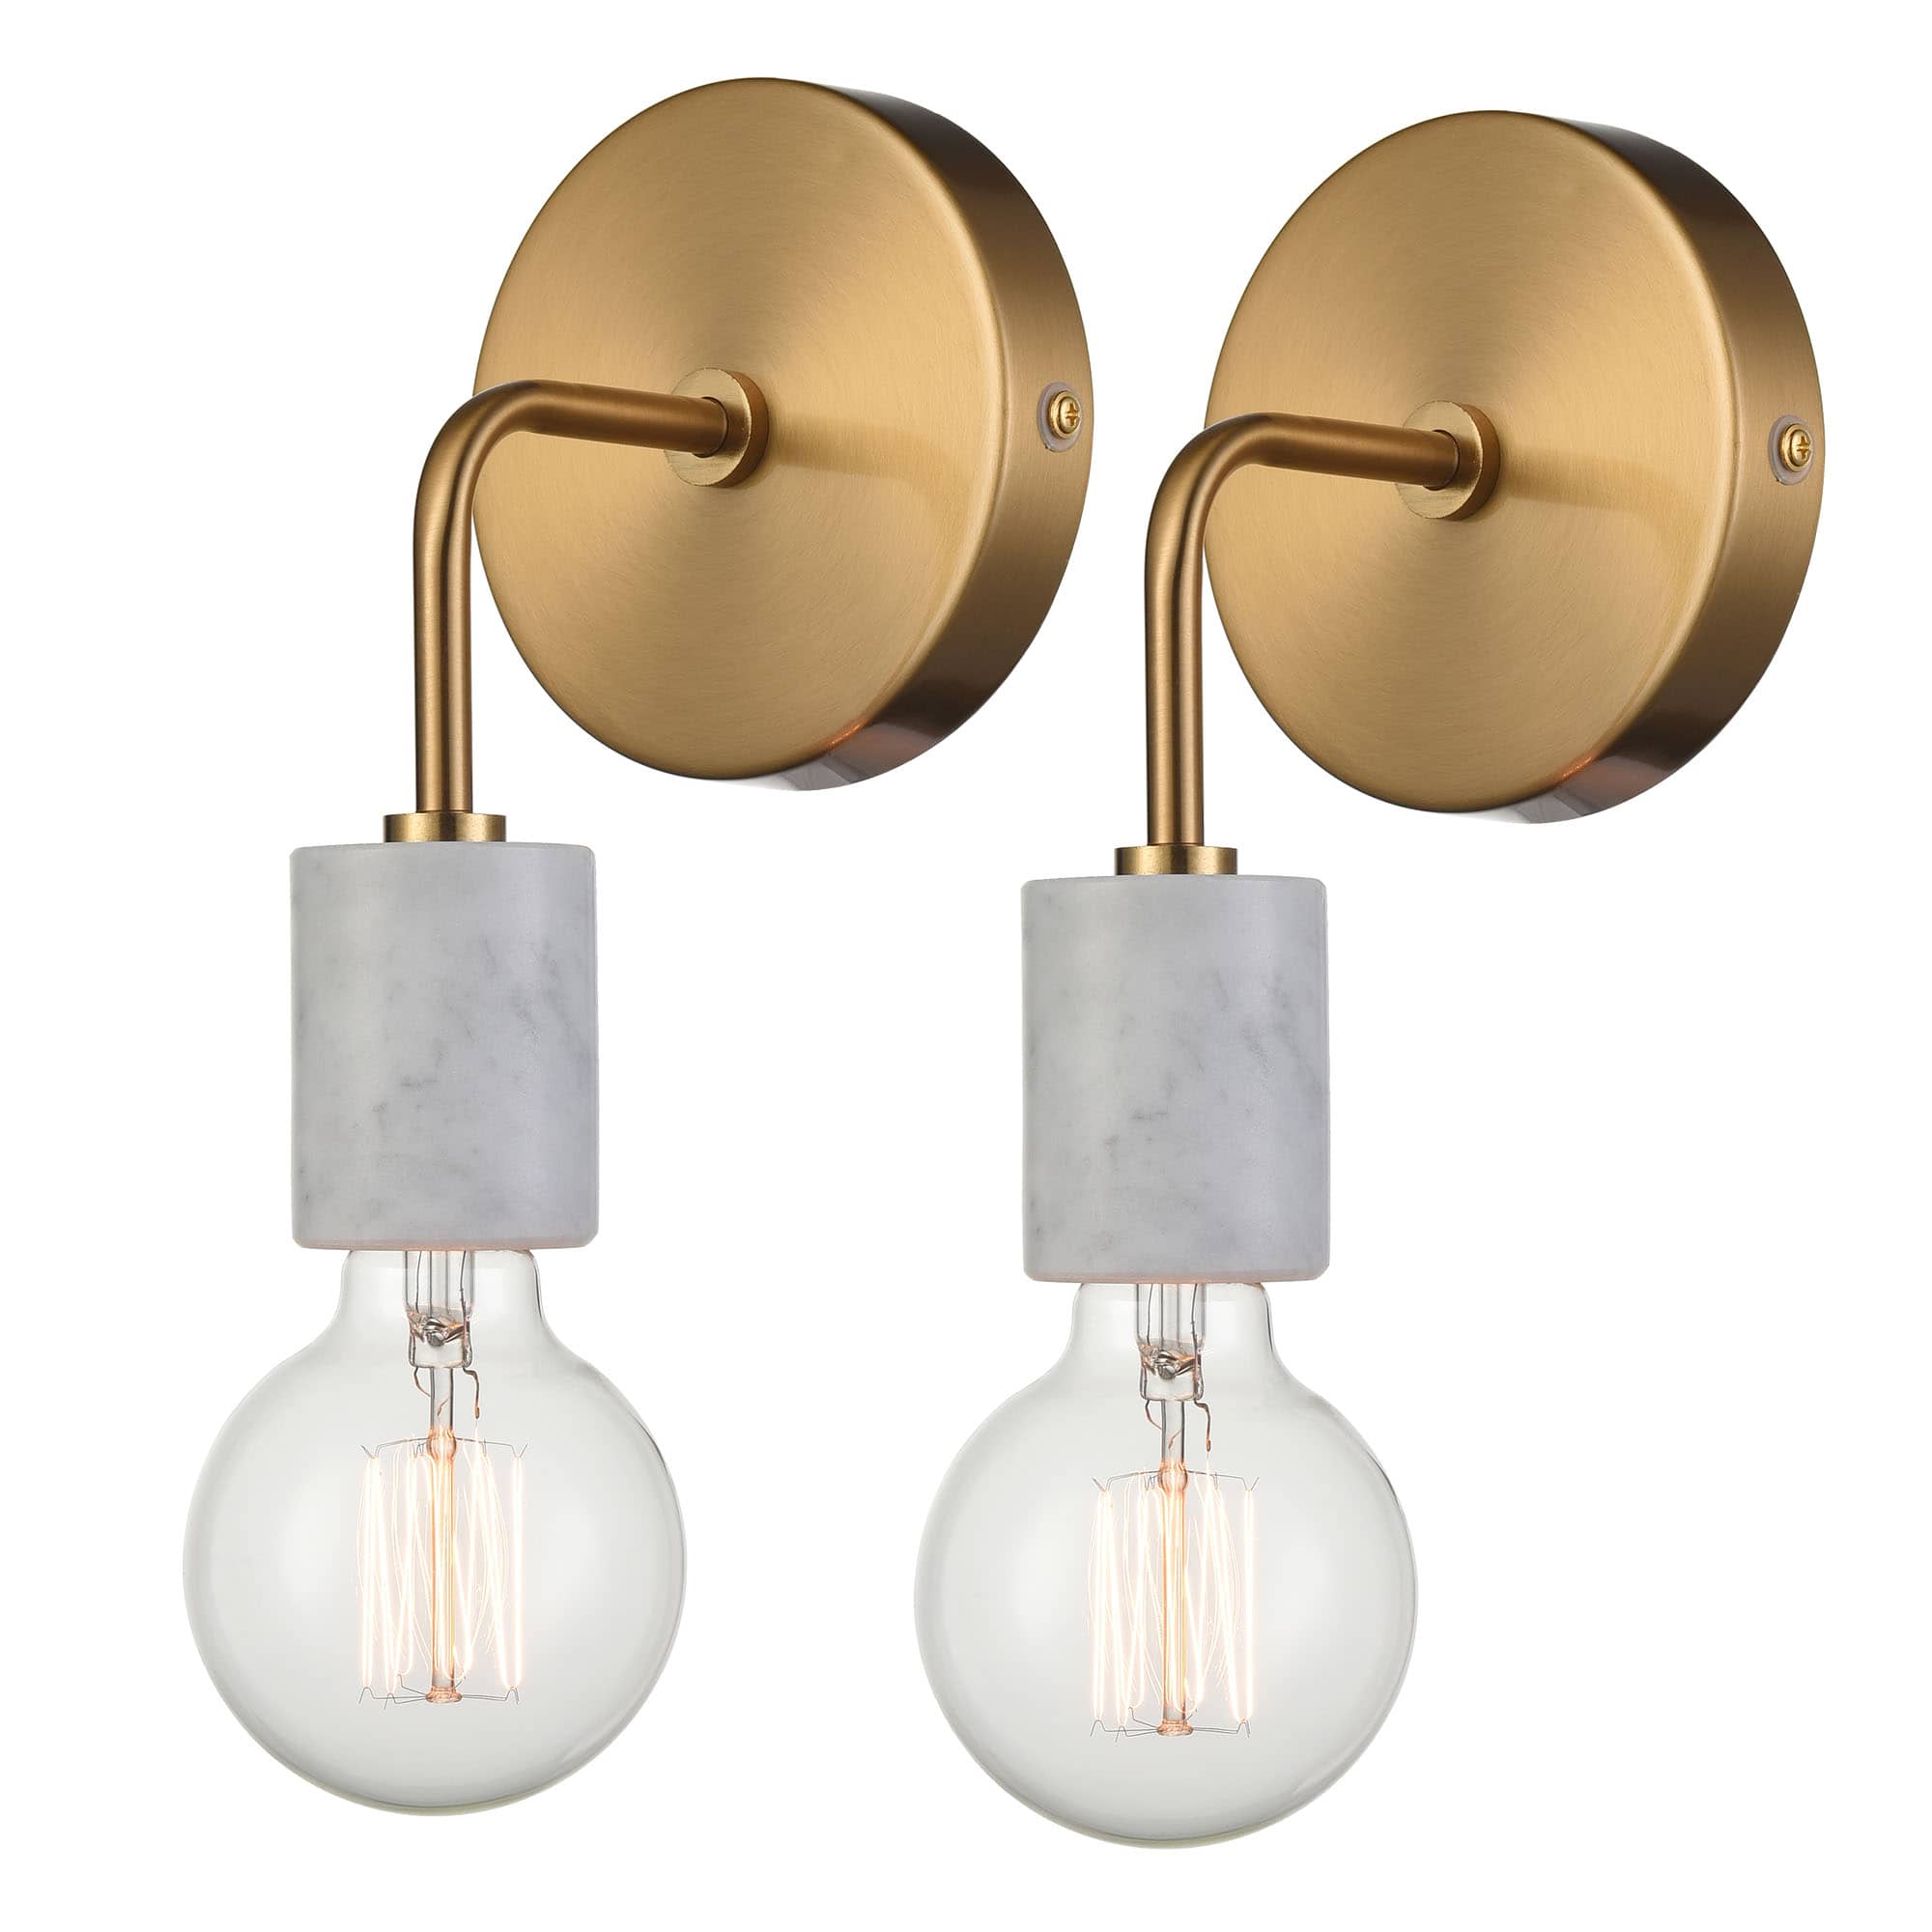 Set of 2 Brushed Brass Metal with White Marble Wall Light Fixture for Bedroom